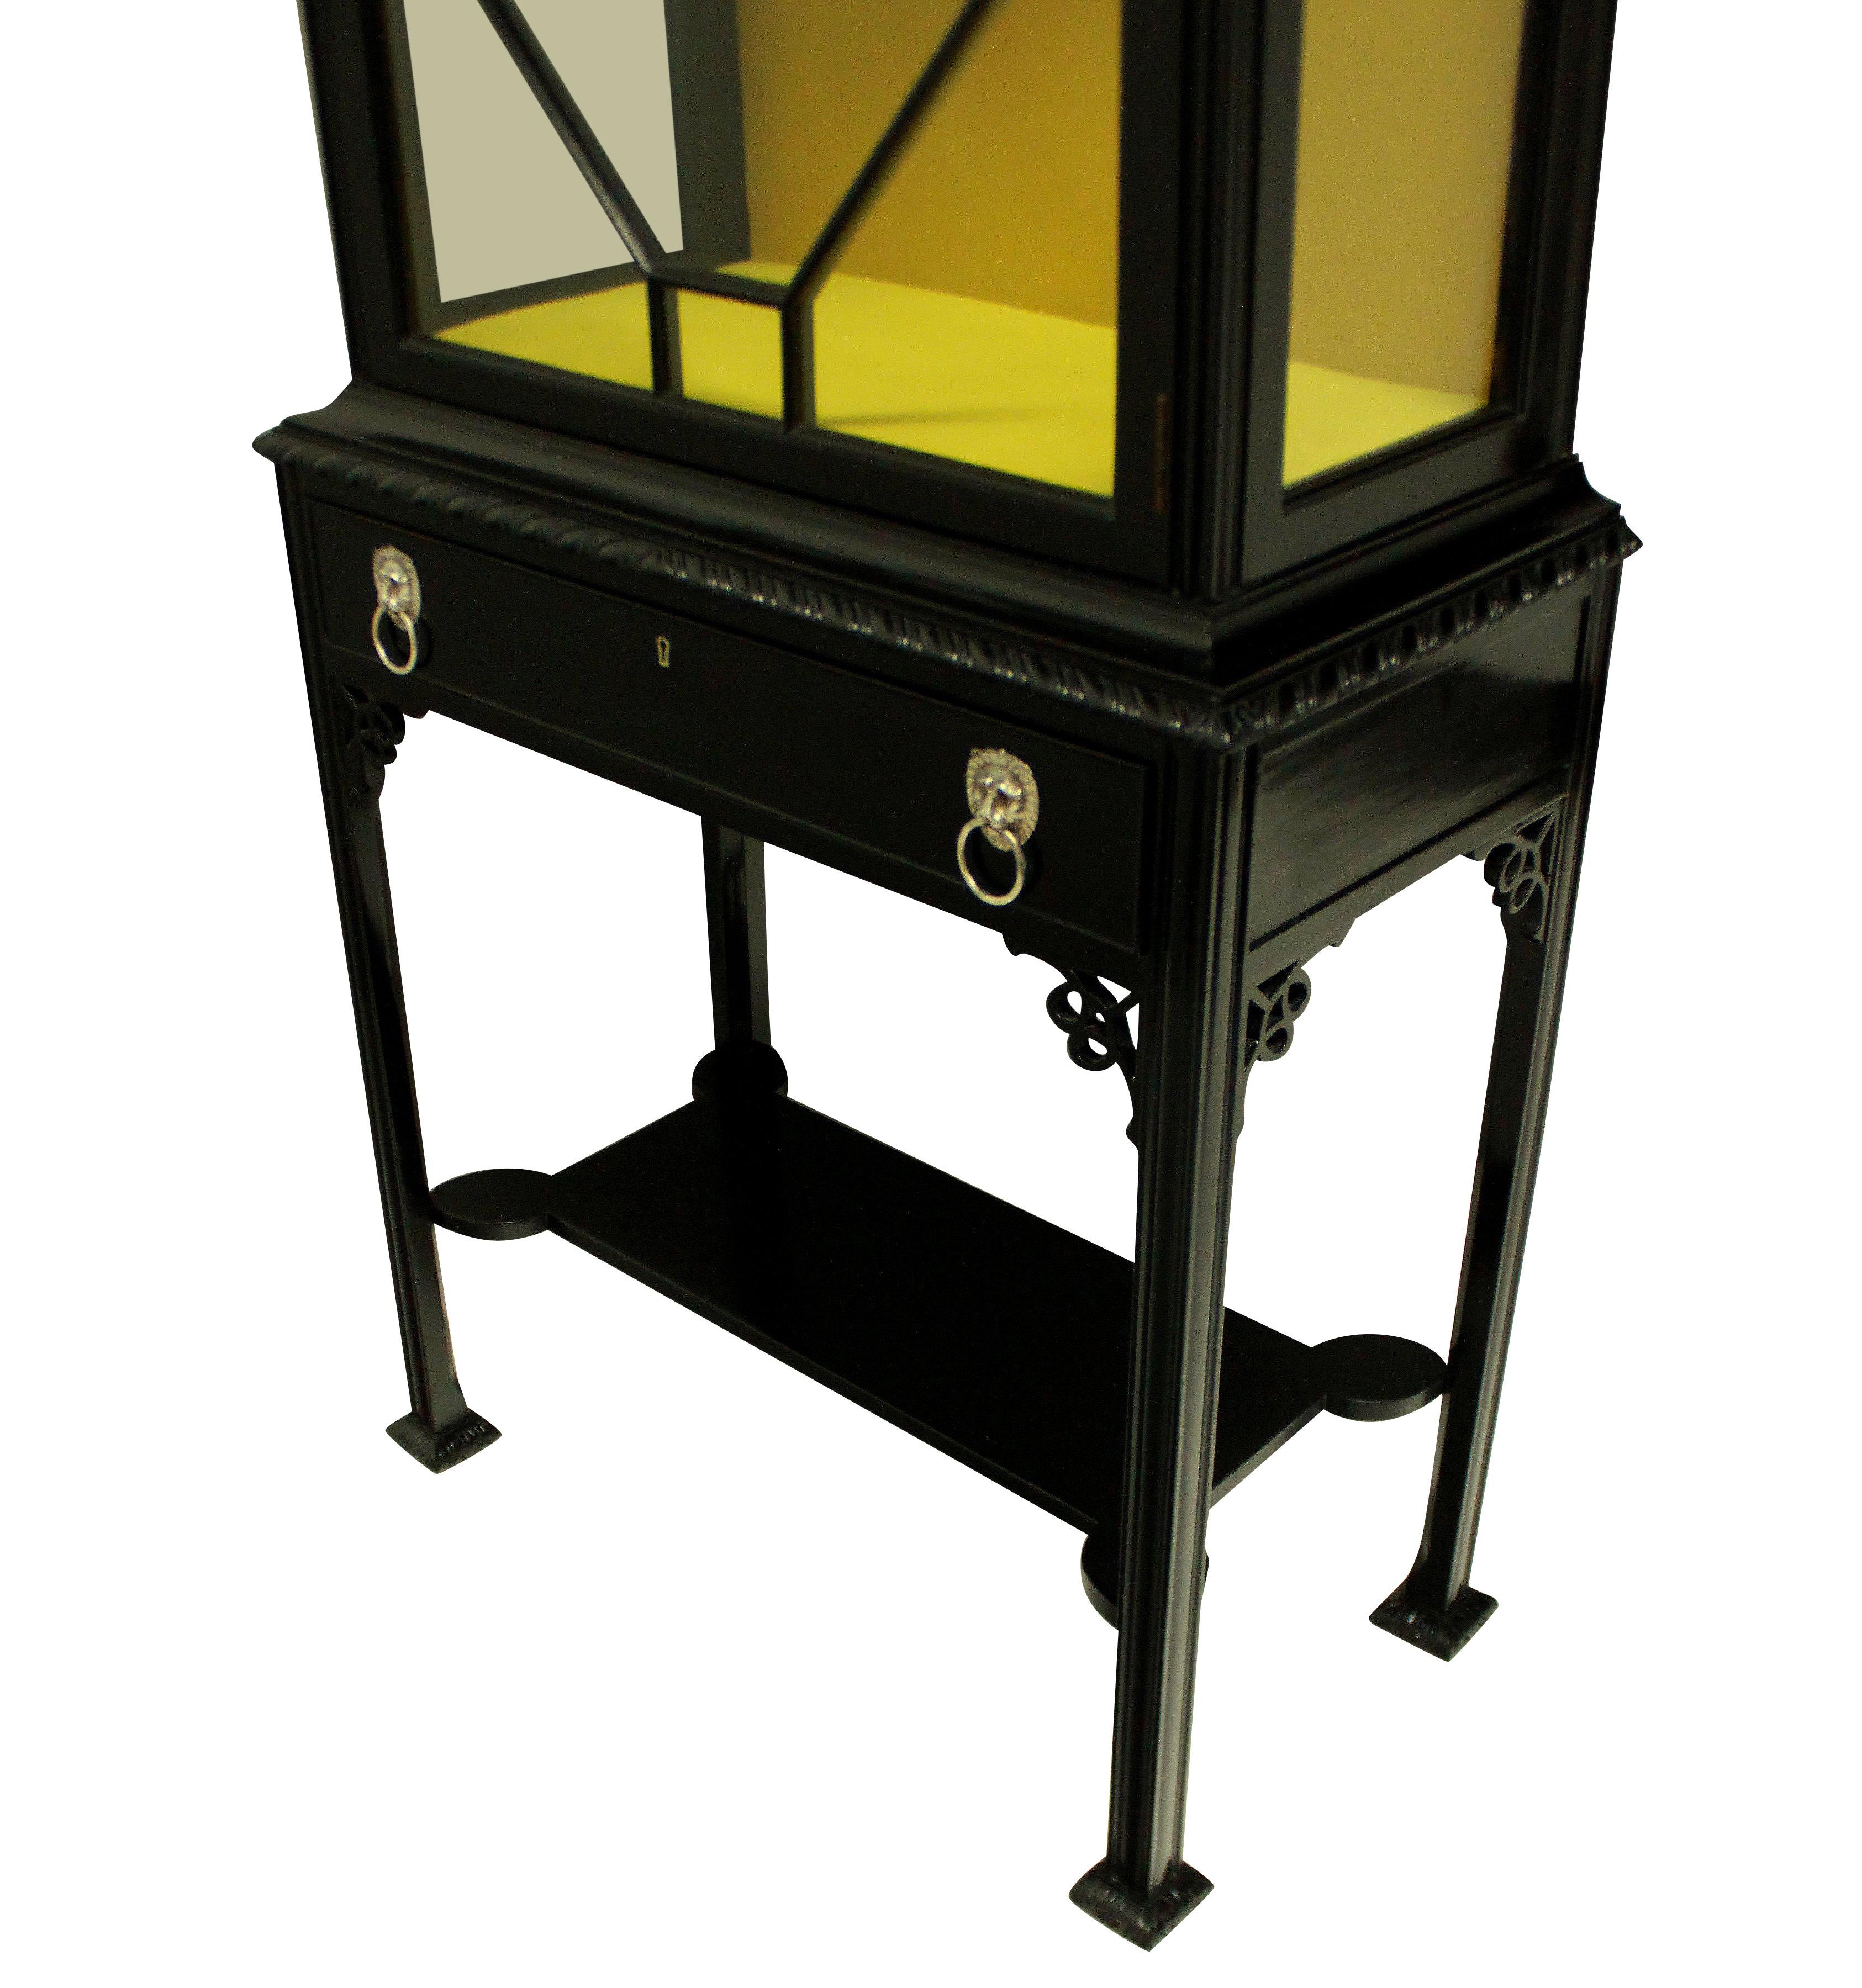 A good quality Chippendale revival display cabinet in black lacquer, designed for Chinese porcelain. With a lower vase stand, single frieze drawer with silver lion mask handles and the upper cabinet with lockable door and shelf. Newly lined in